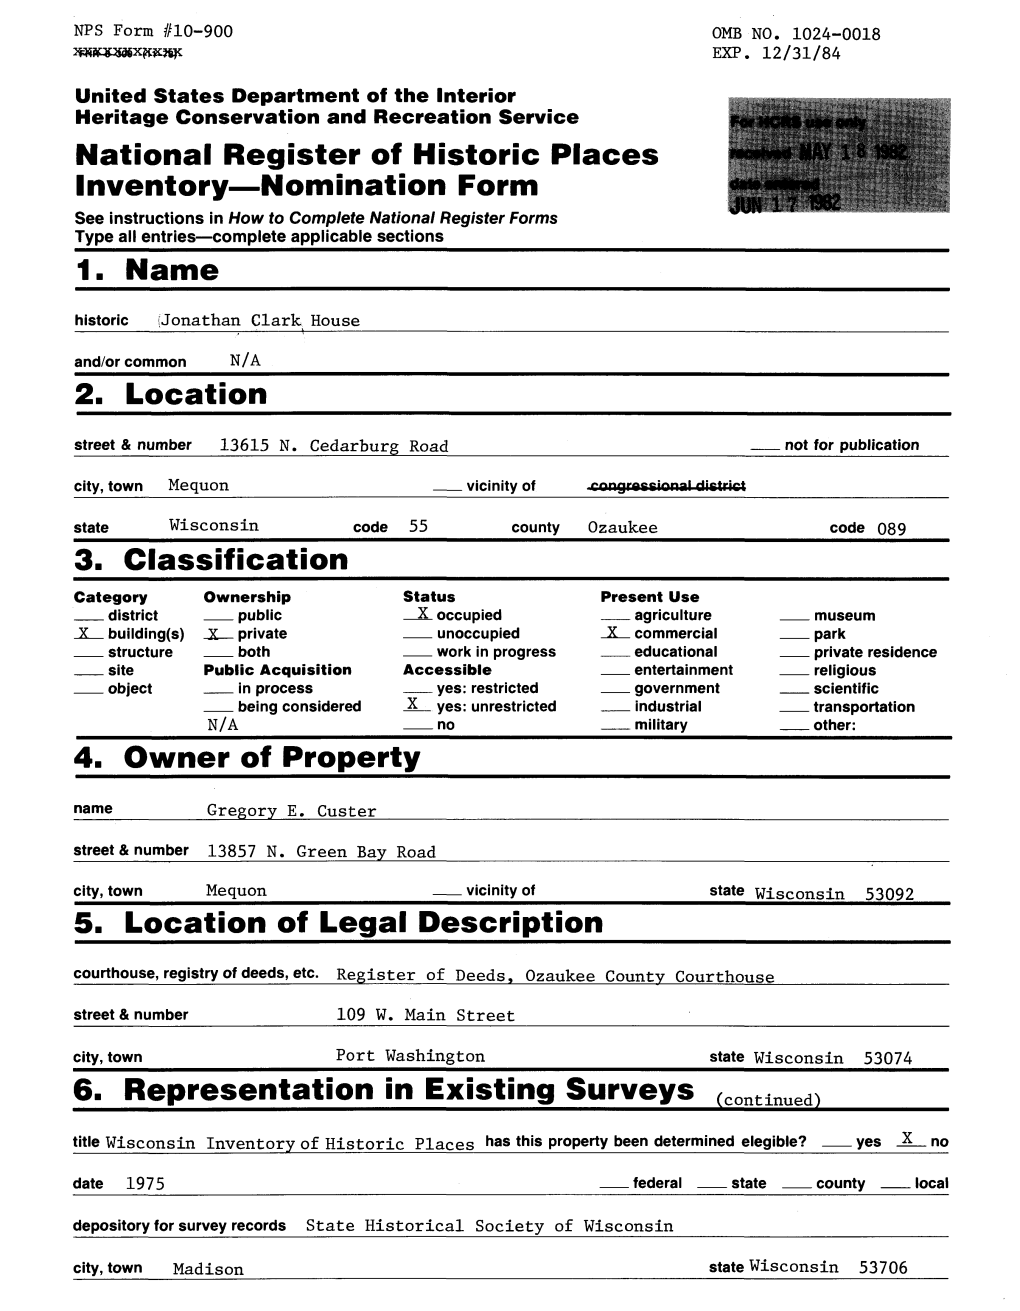 Nomination Form See Instructions in How to Complete National Register Forms Type All Entries—Complete Applicable Sections 1